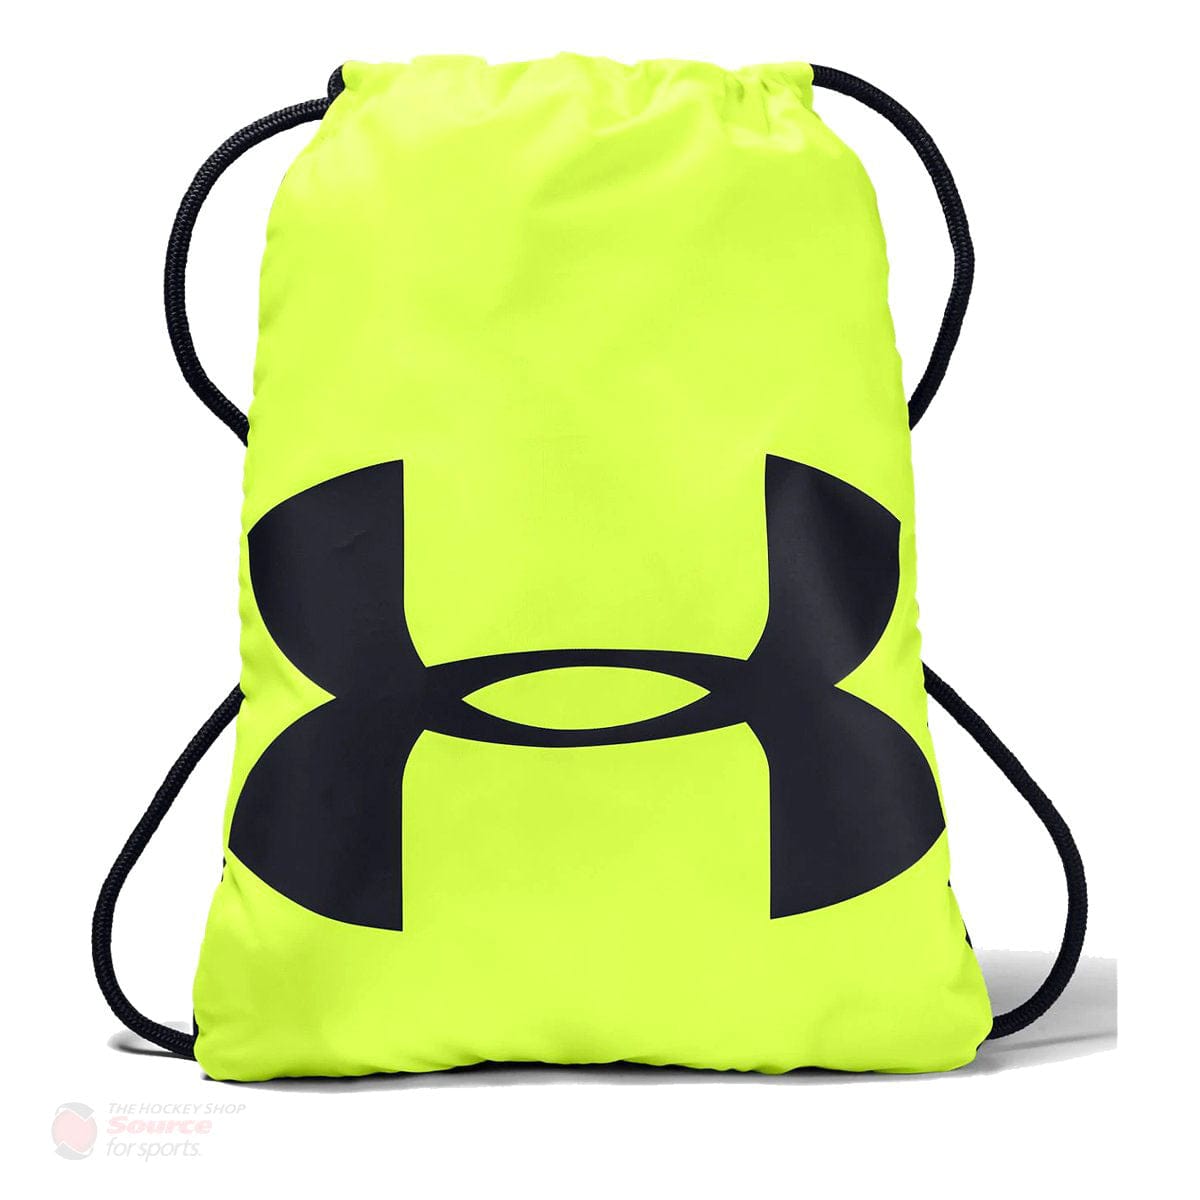 Under Armour Ozsee Sackpack Backpack